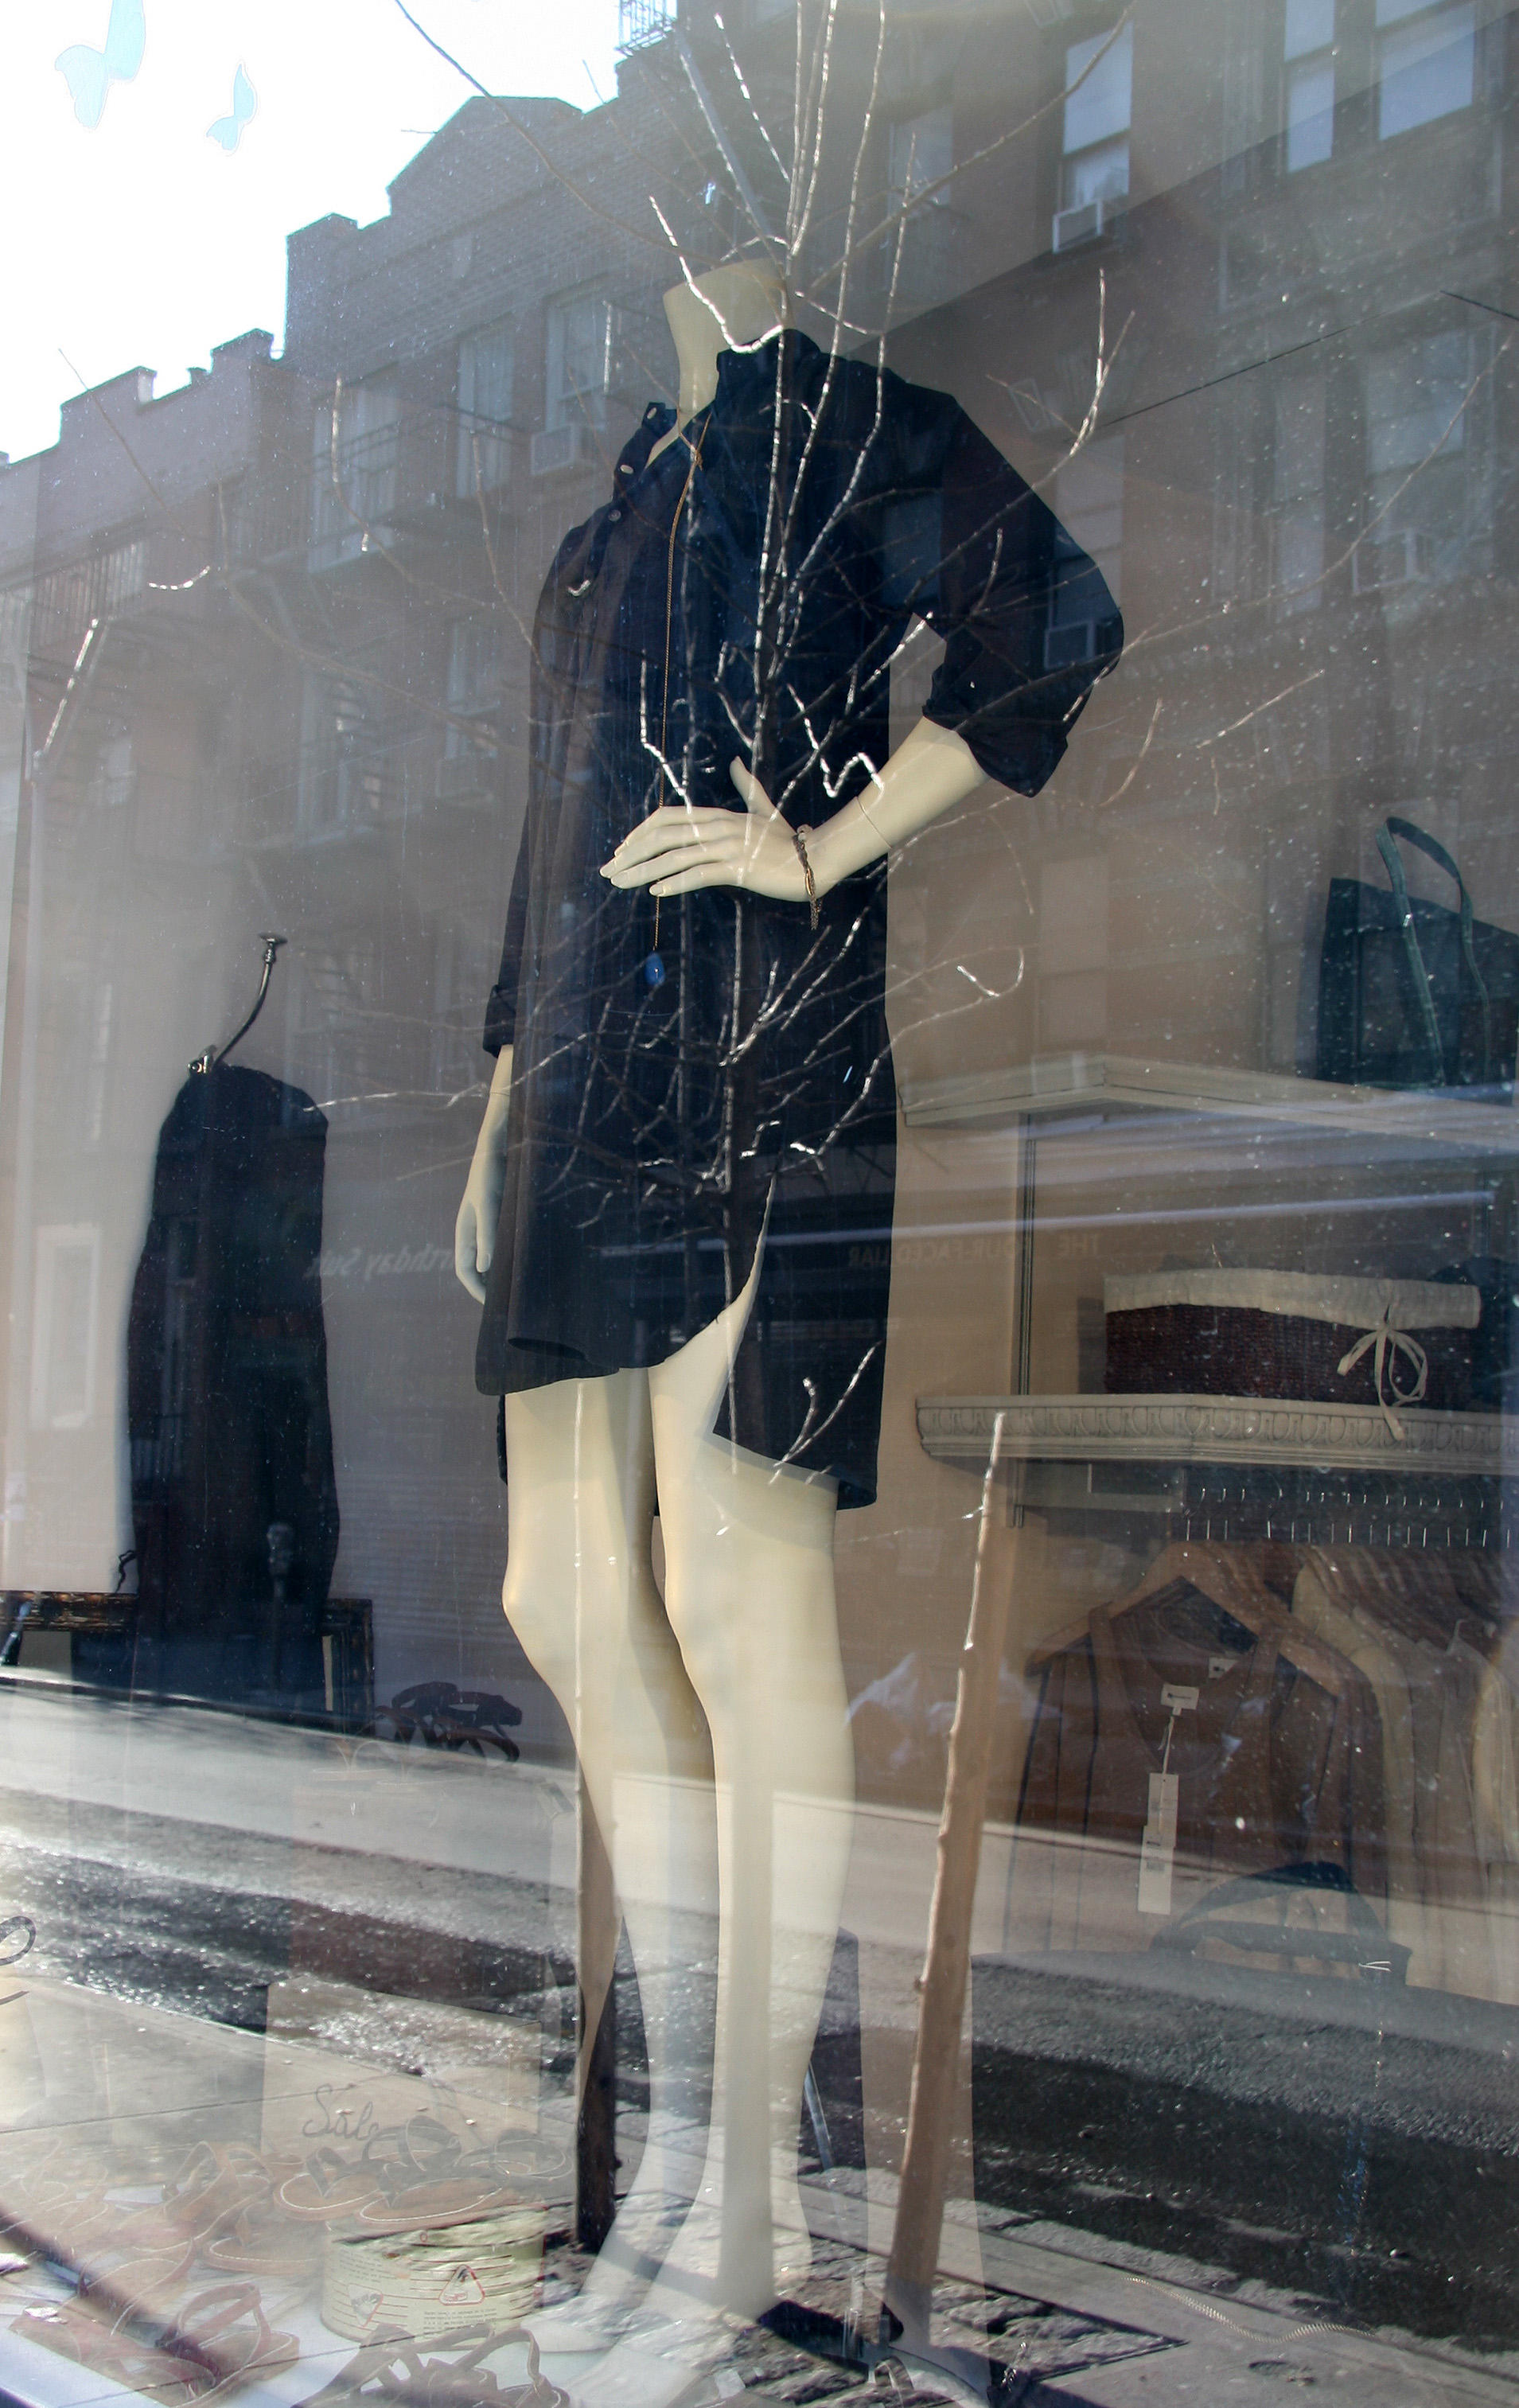 Boutique Window with Reflection